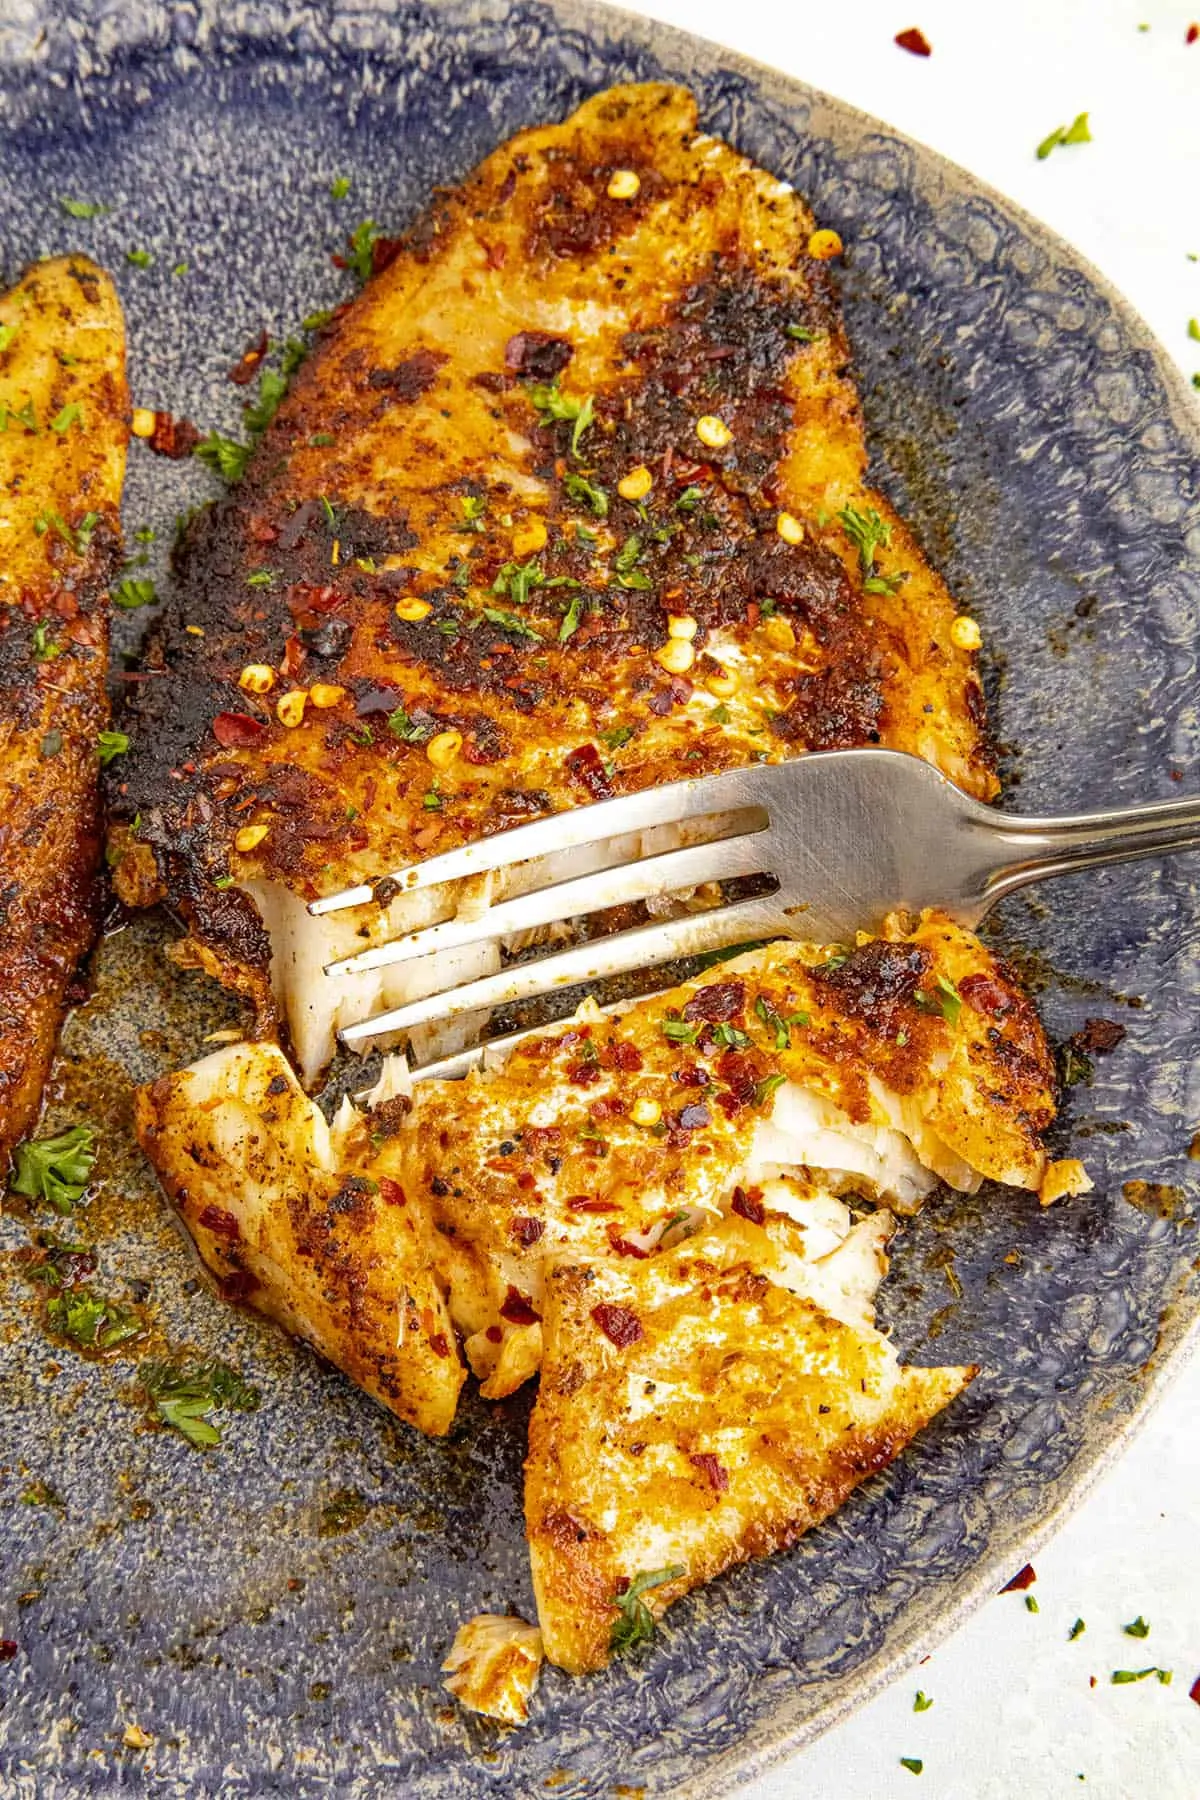 Taking a scoop with a fork of my spicy blackened fish